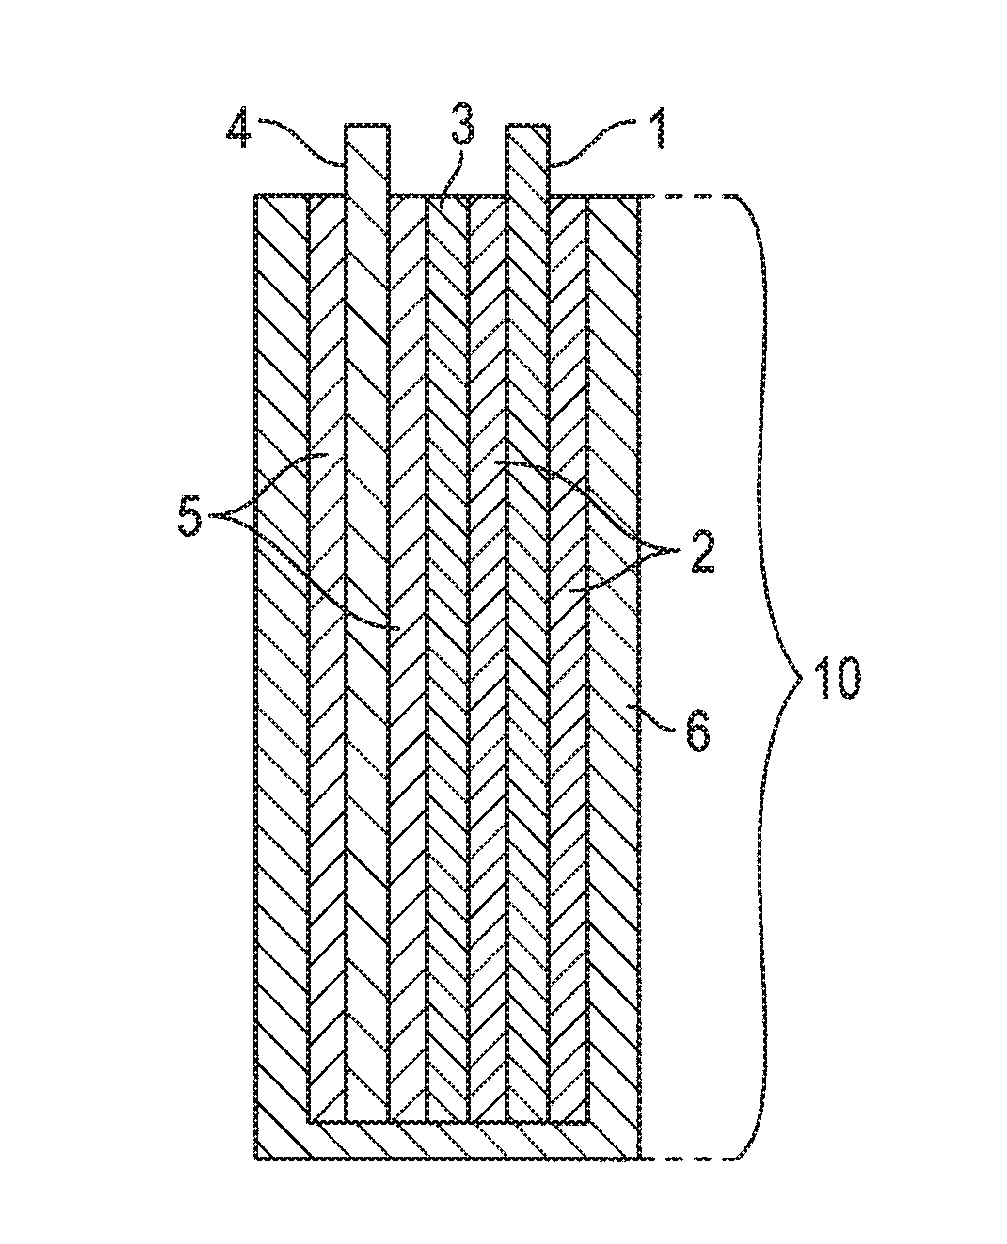 Mixed Material Cathode for Secondary Alkaline Batteries